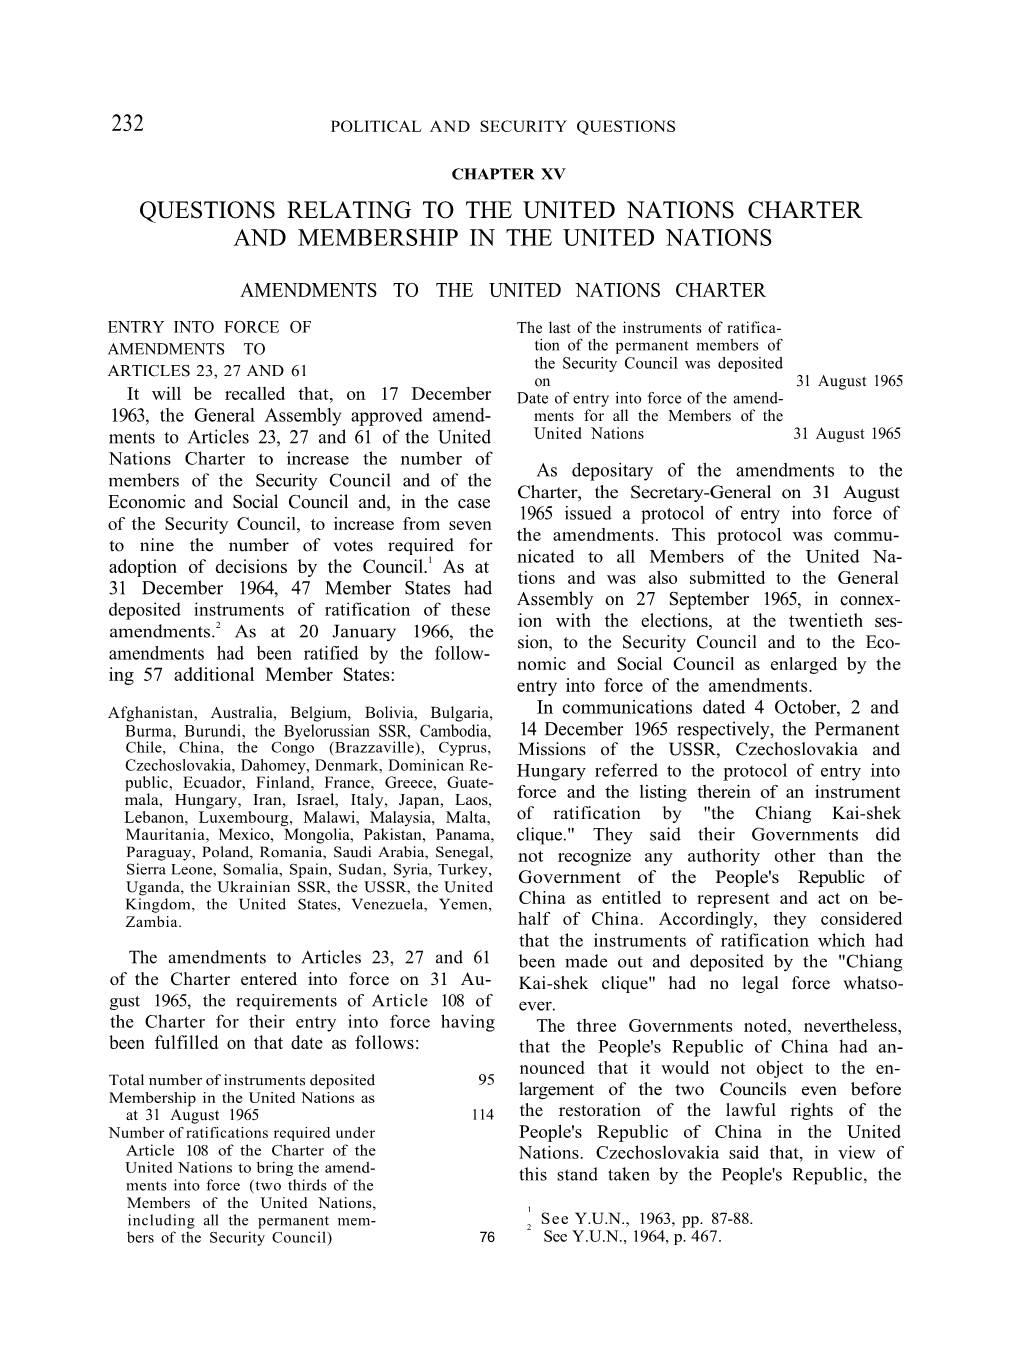 [ 1965 ] Part 1 Sec 1 Chapter 15 Questions Relating to the United Nations Charter and Membership in the United Nations